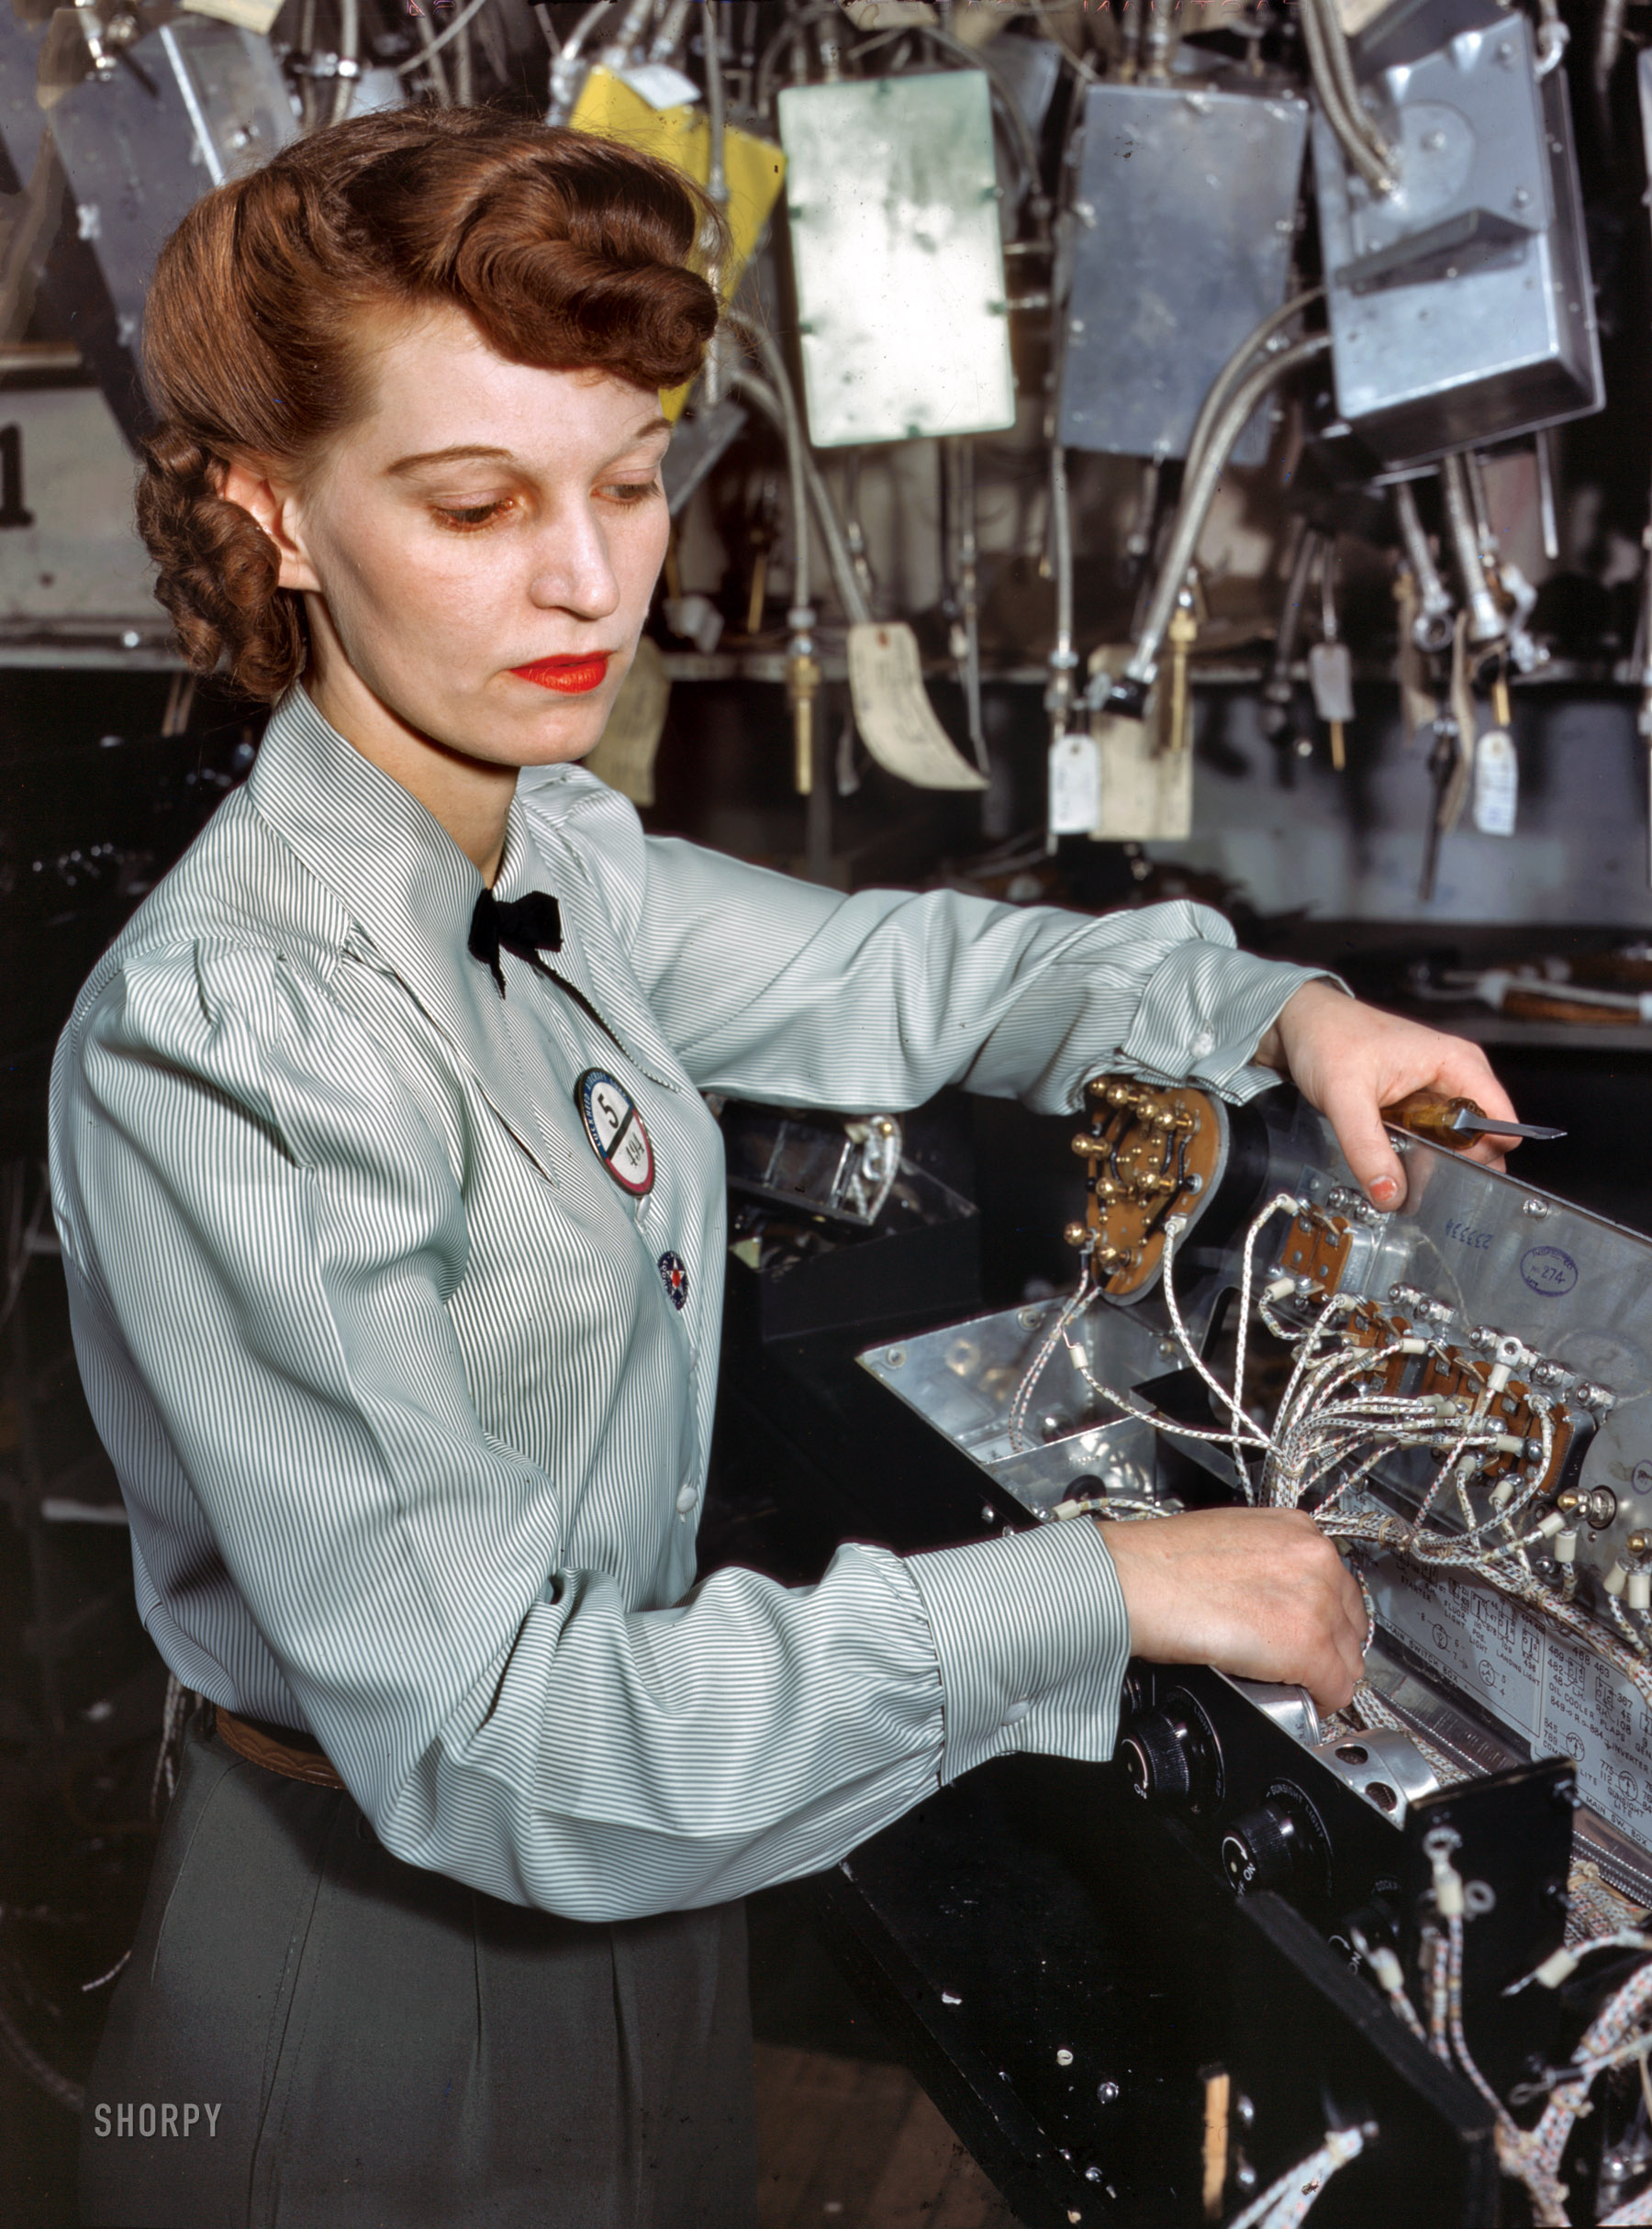 December 1941. "Electronics technician, Goodyear Aircraft Corp., Akron, Ohio." 4x5 Kodachrome transparency by Alfred Palmer, OWI. View full size.